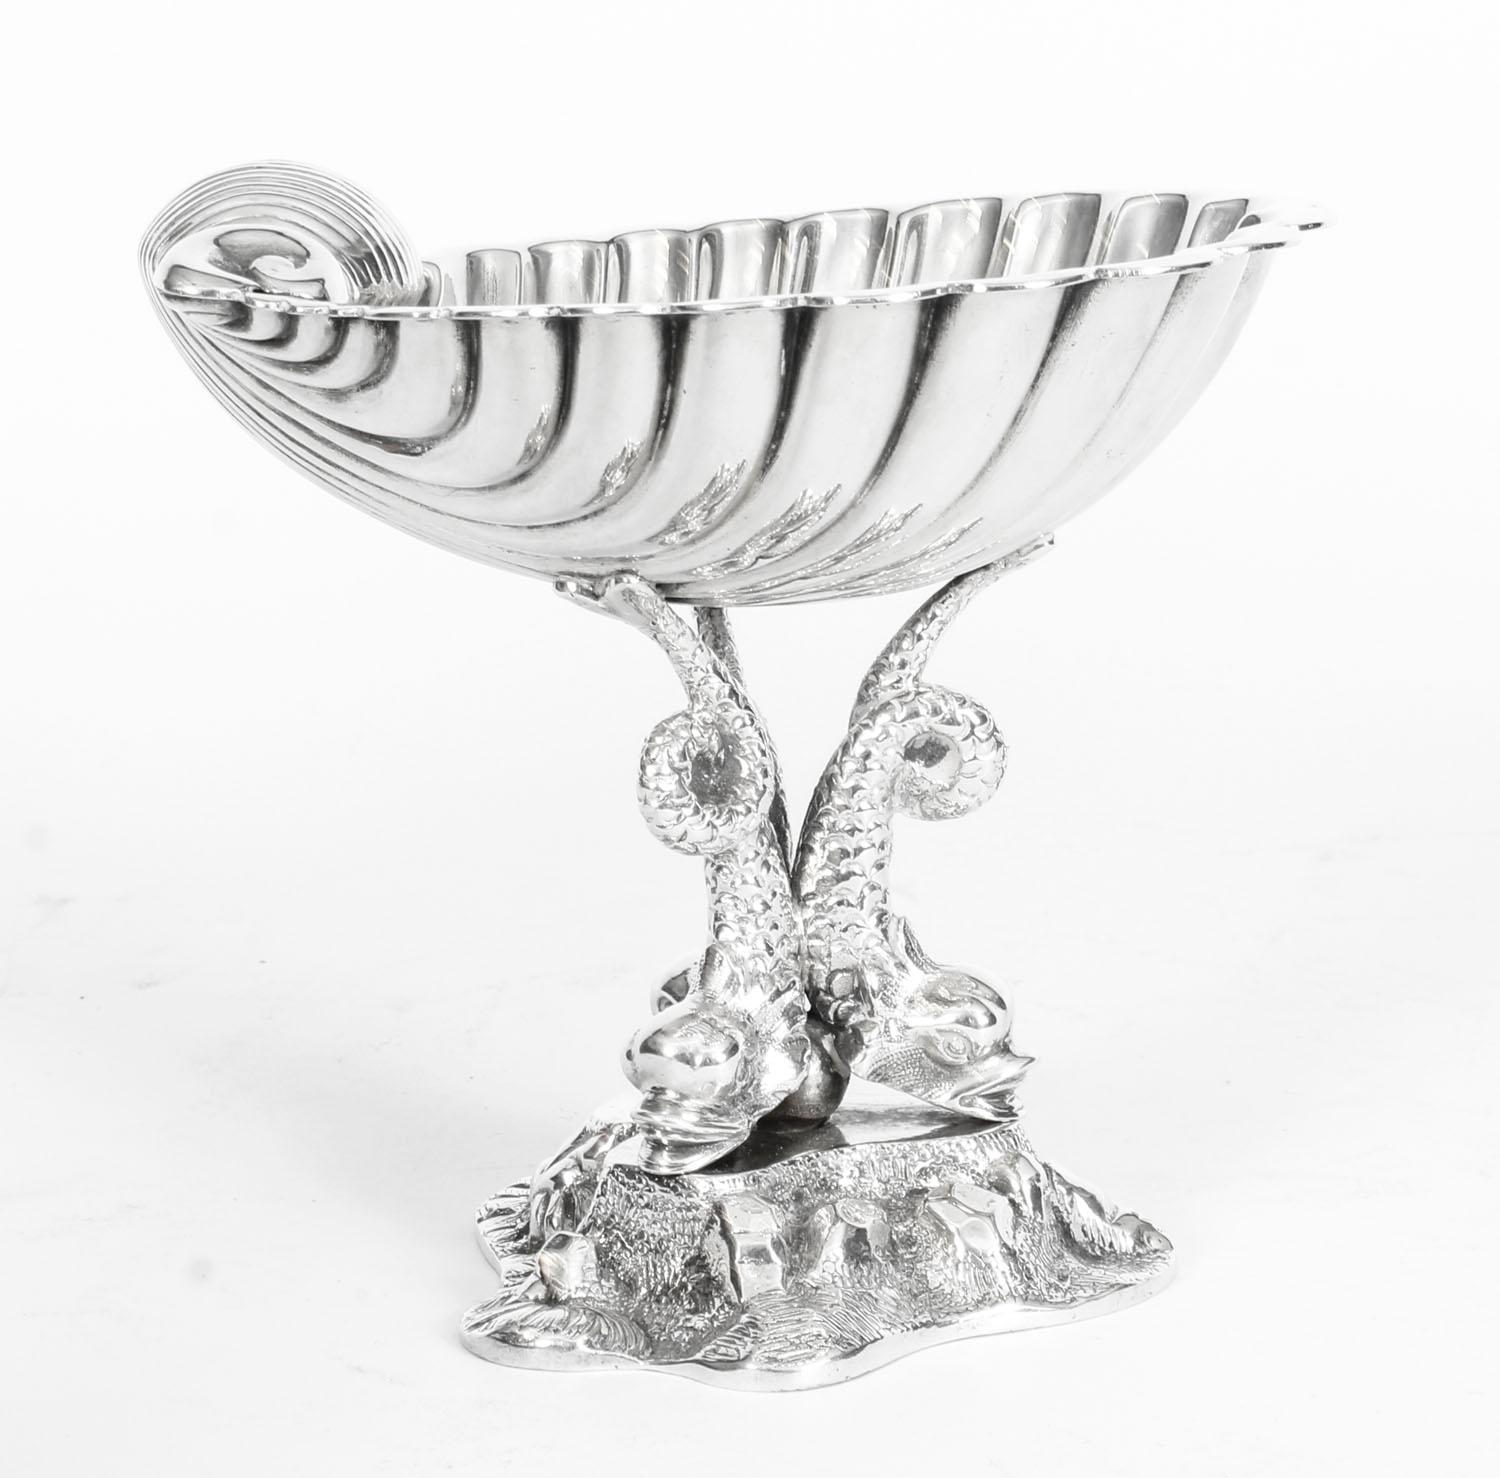 This is a fine quality antique silver plated Victorian centrepiece bearing the makers stamp to the underside of the renowned silversmiths Benetfink & Co., Cheapside, London, mid-19th century in date.

This wonderful centerpiece was made in the